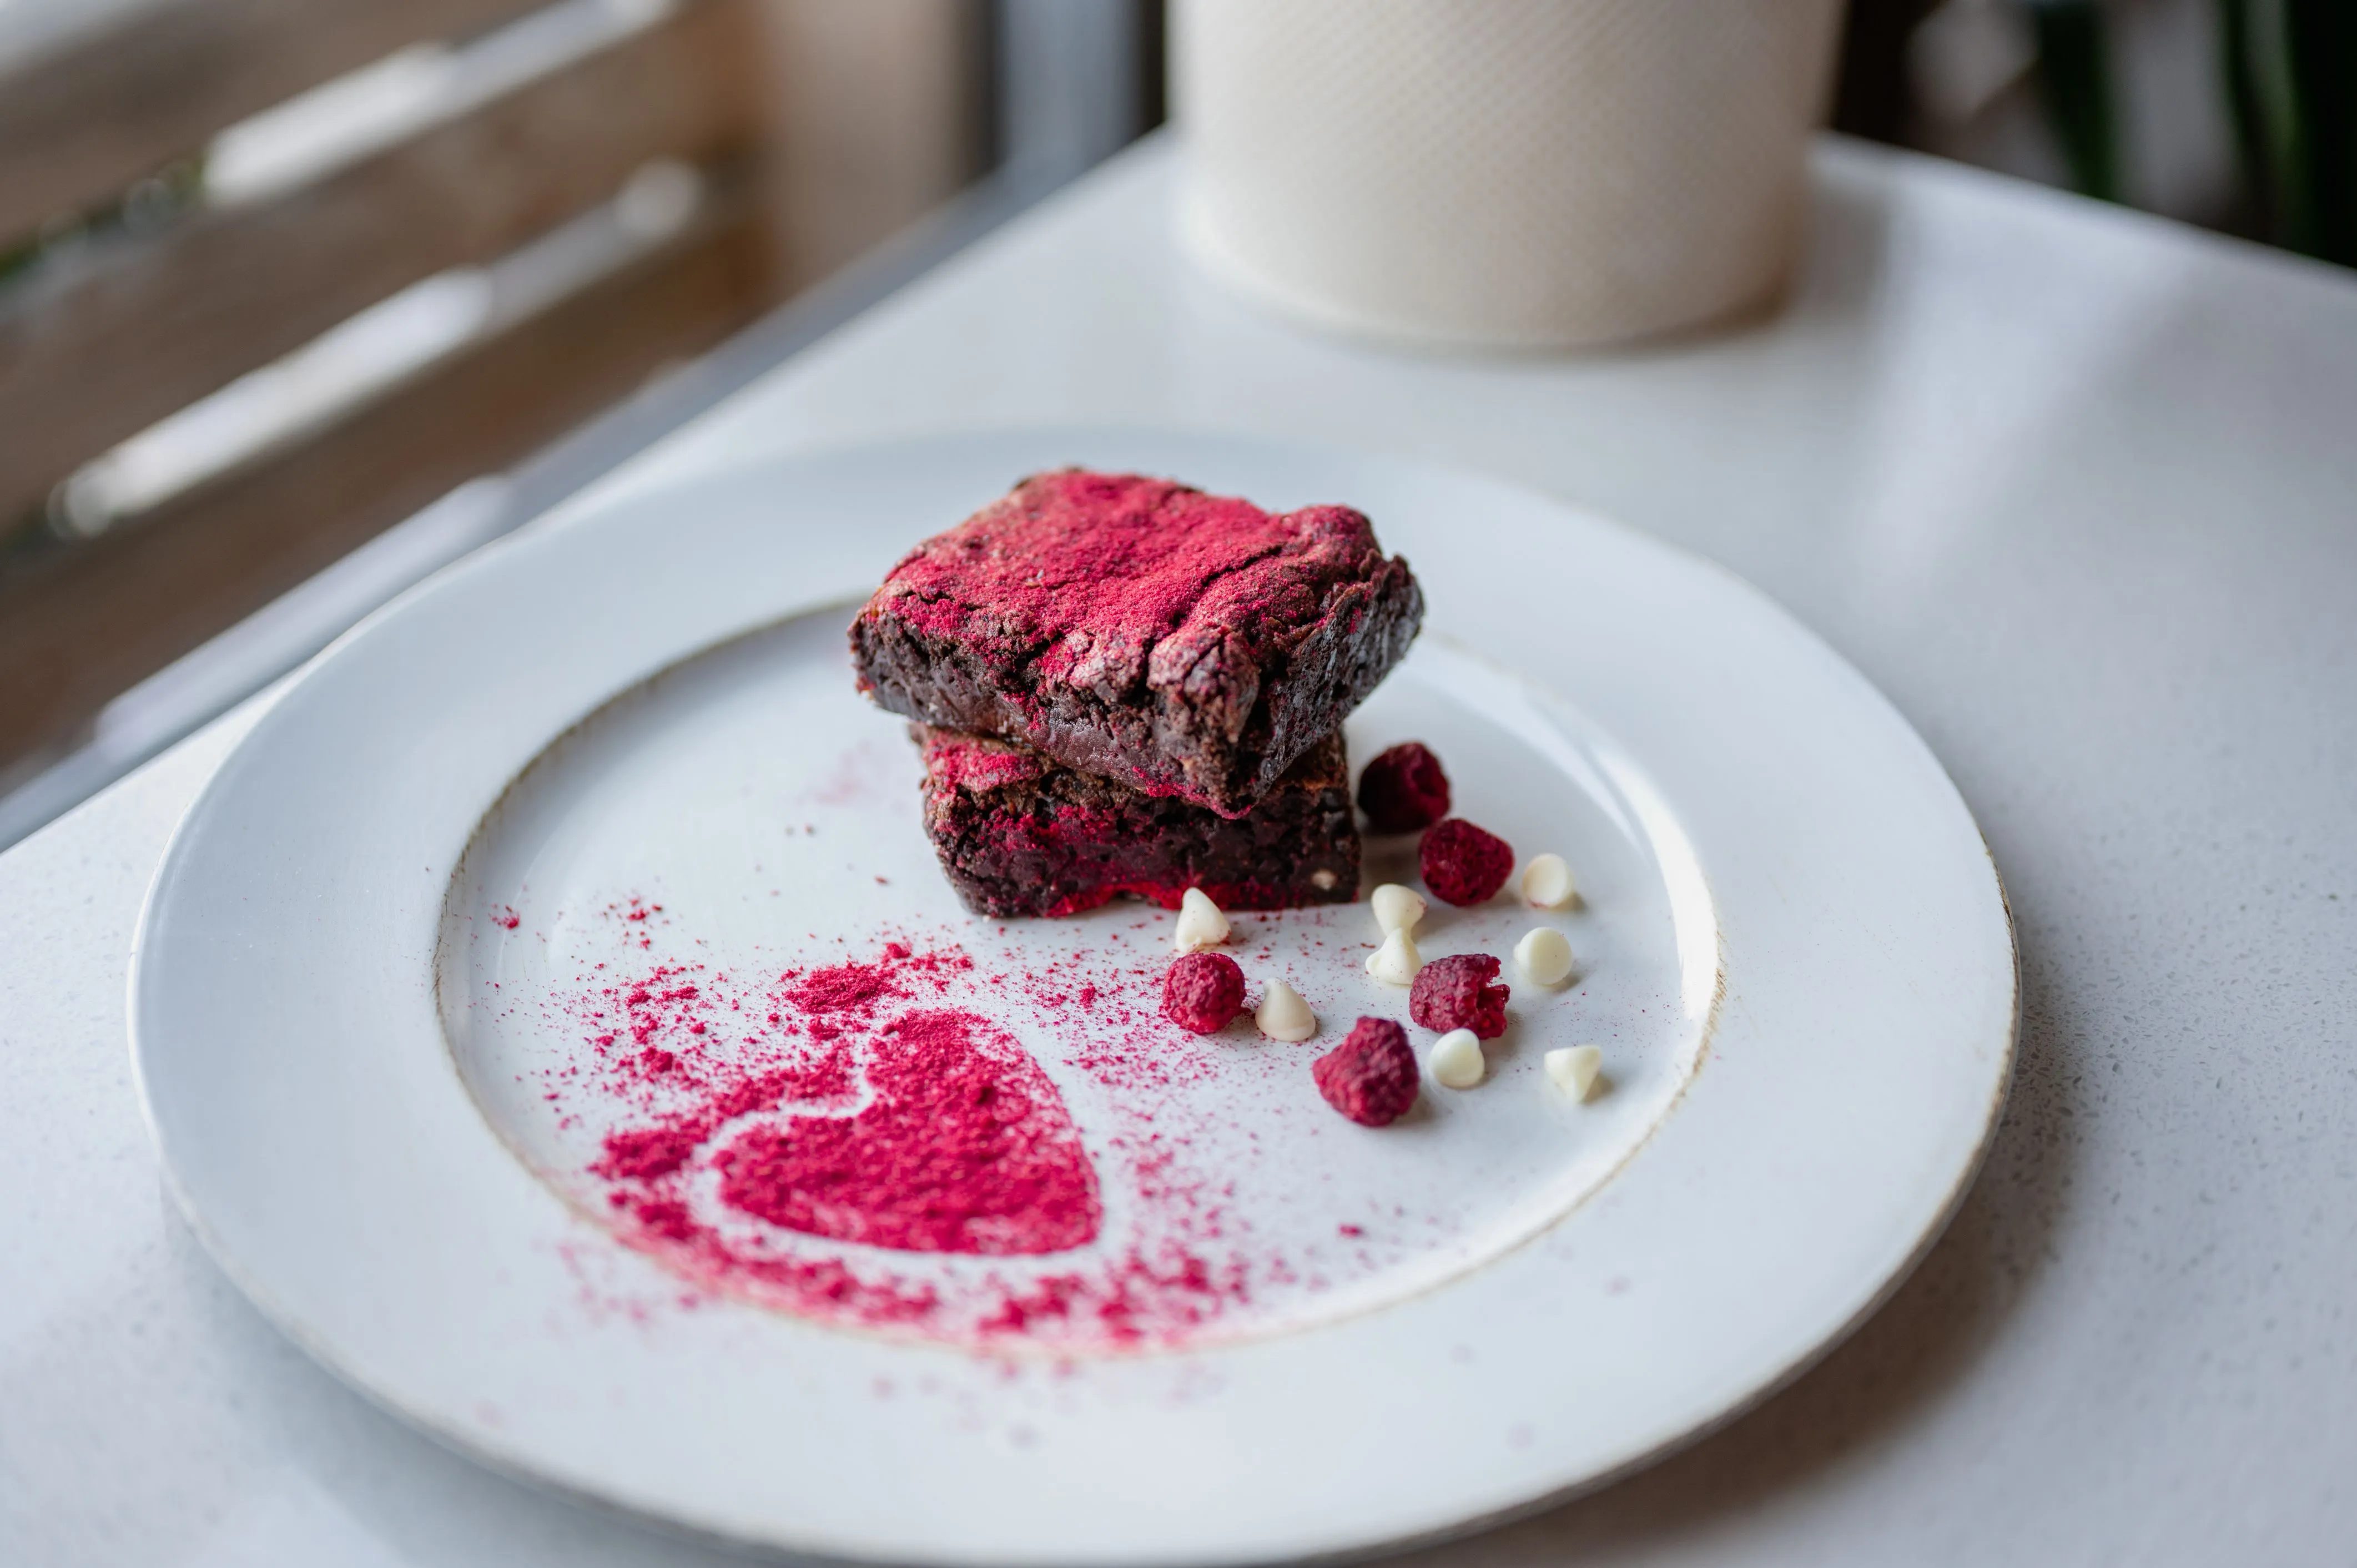 Red velvet brownies presented on a plate with freeze-dried raspberries and white chocolate chips, with a powdered heart-shaped decoration.